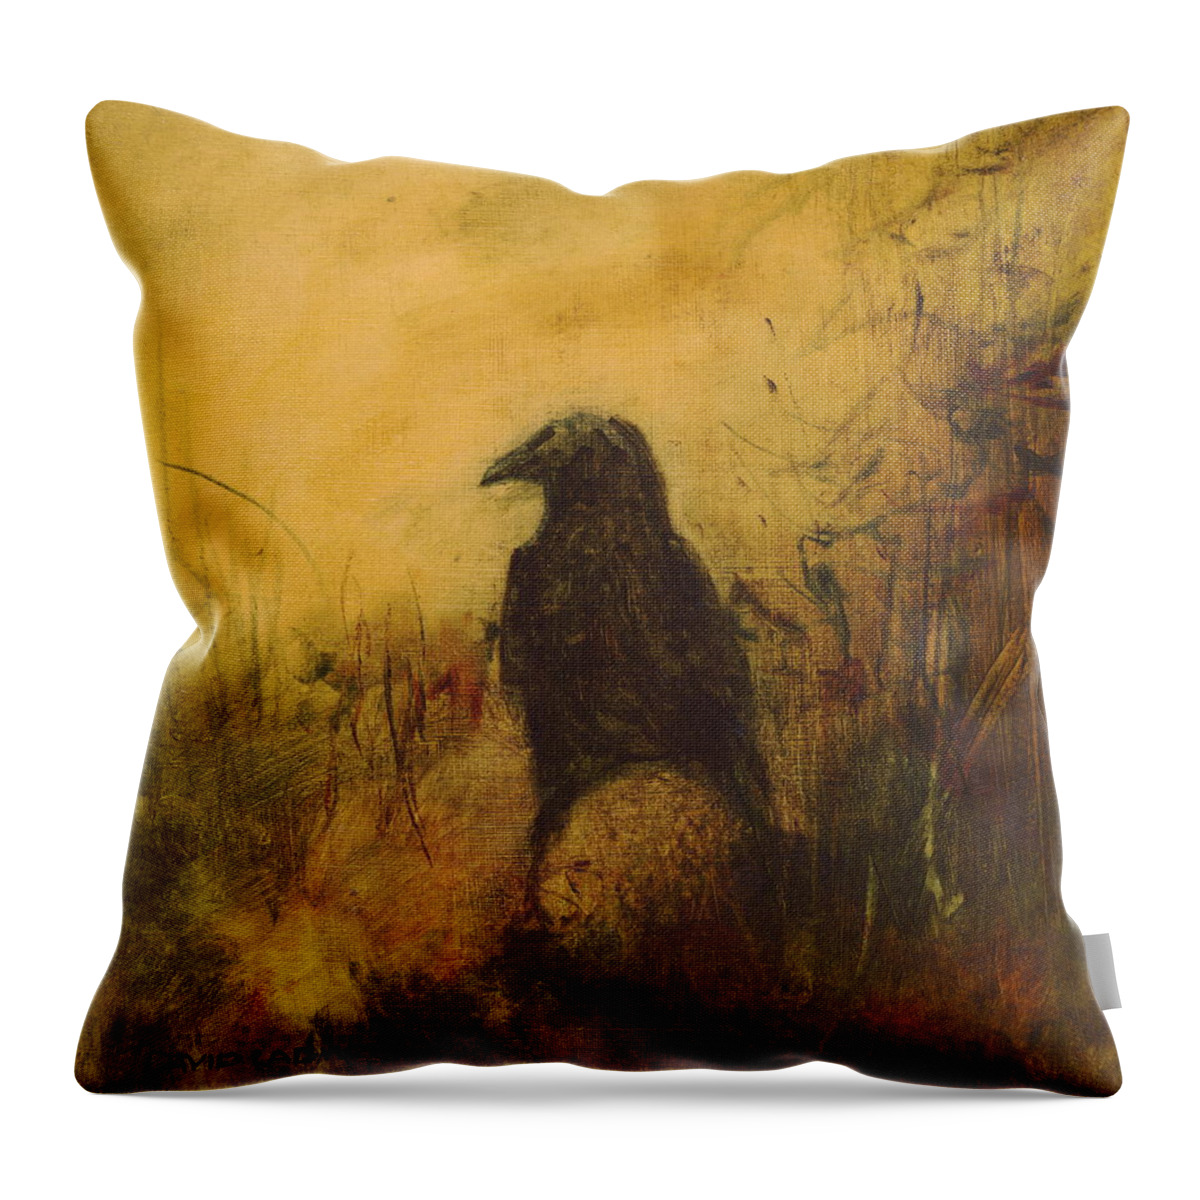 Crow Throw Pillow featuring the painting Crow 7 by David Ladmore